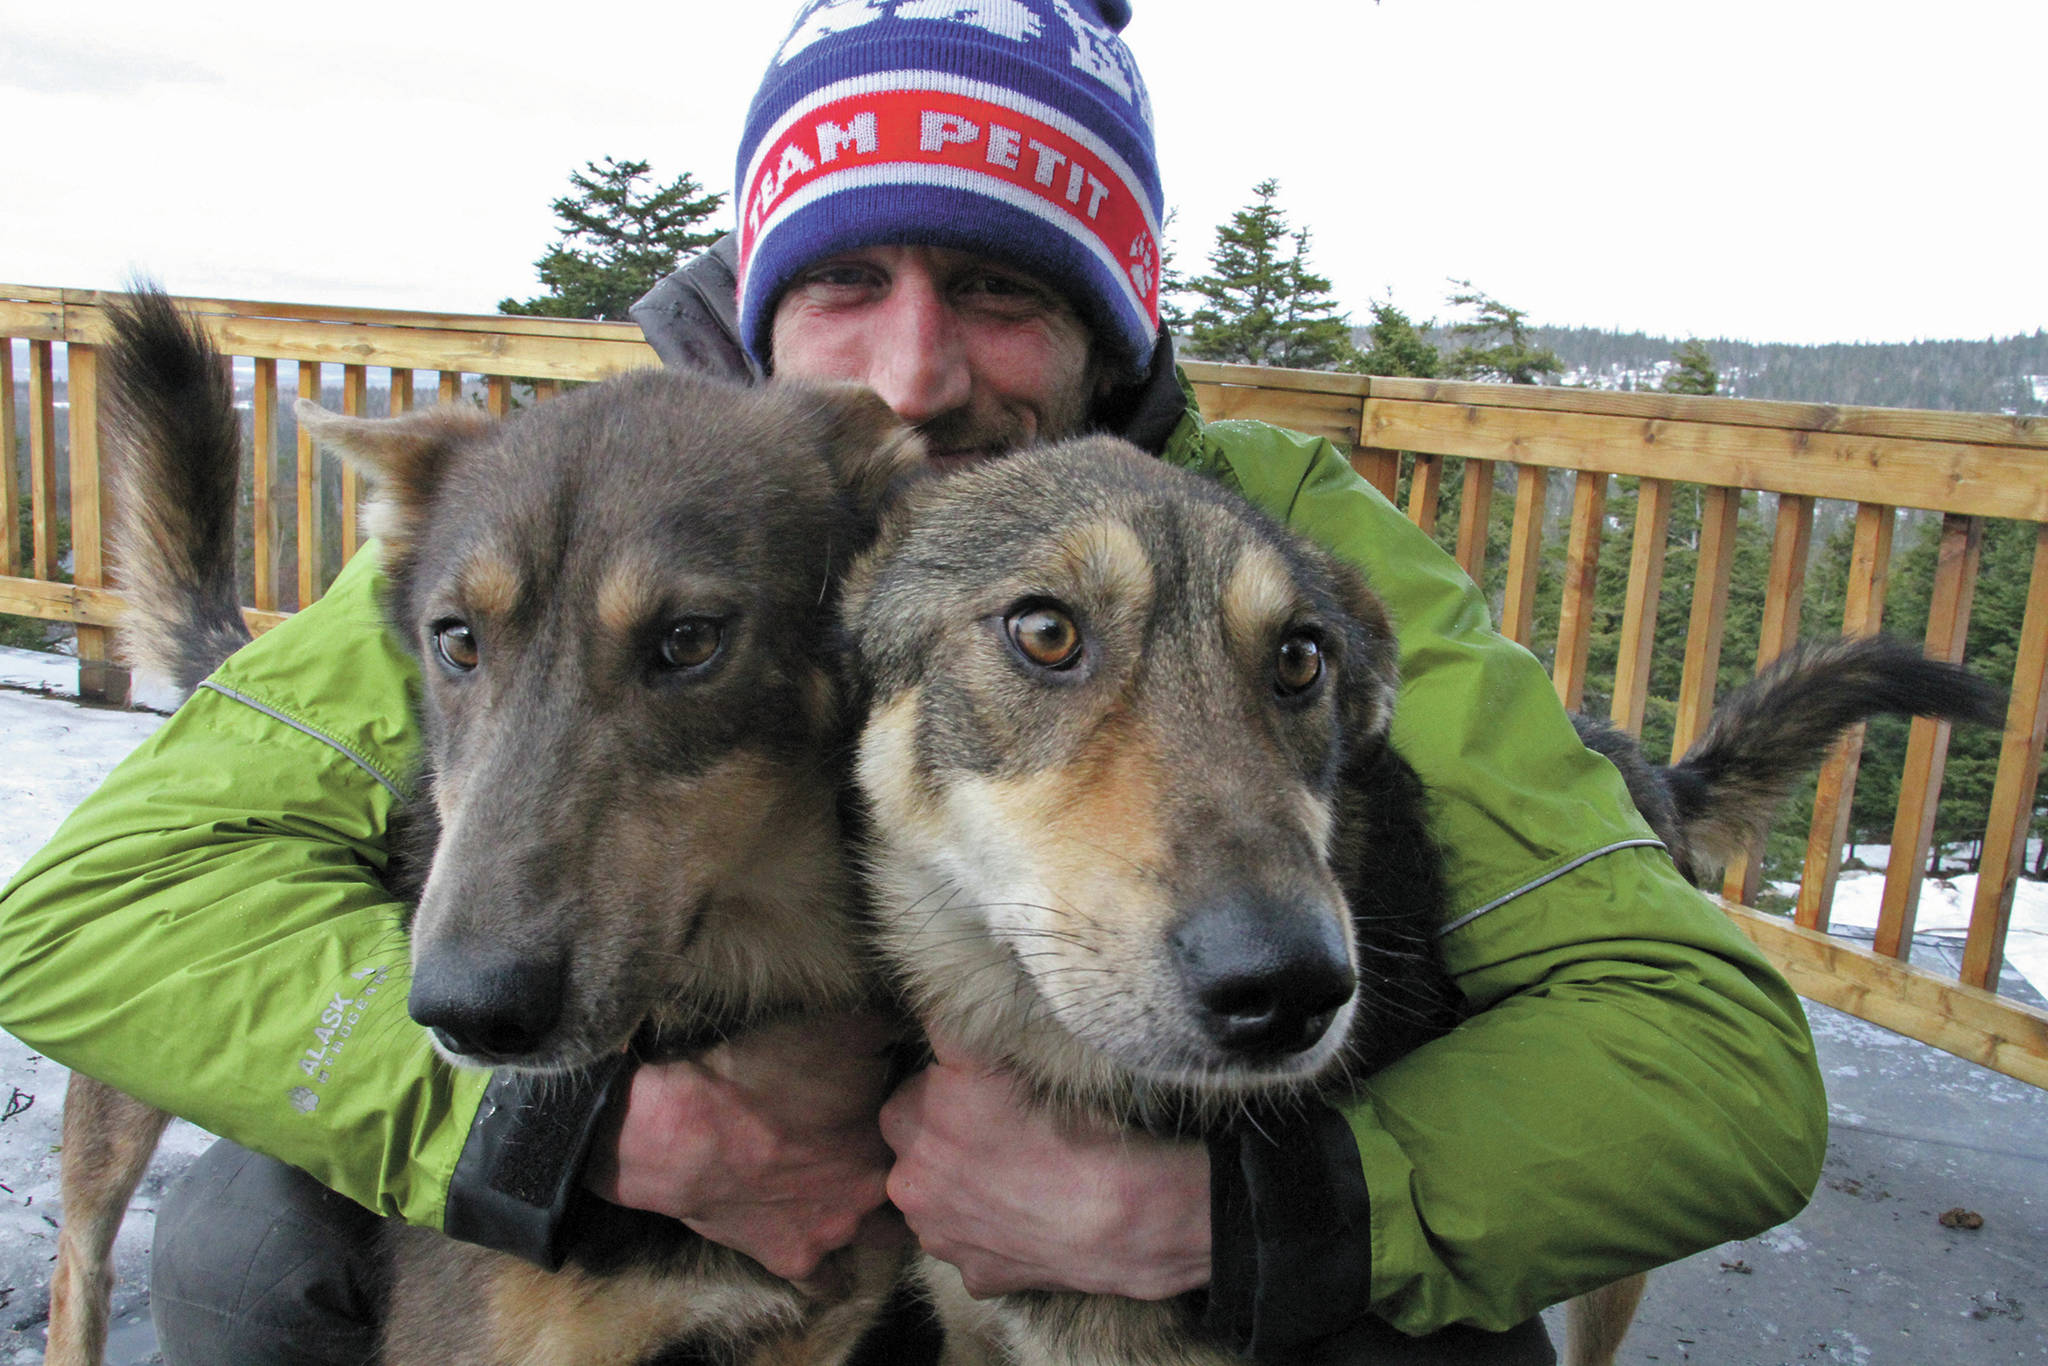 AP file Photo/Mark Thiessen                                 In this March 20, 2019, file photo, Iditarod musher Nicolas Petit, of France, poses with two of his dogs in Anchorage. Nearly a third of the 57 mushers in this year’s Iditarod Trail Sled Dog Race have quit the race before finishing, including Petit, who activated an alert button seeking rescue last Thursday morning, March 19, because of weather conditions.